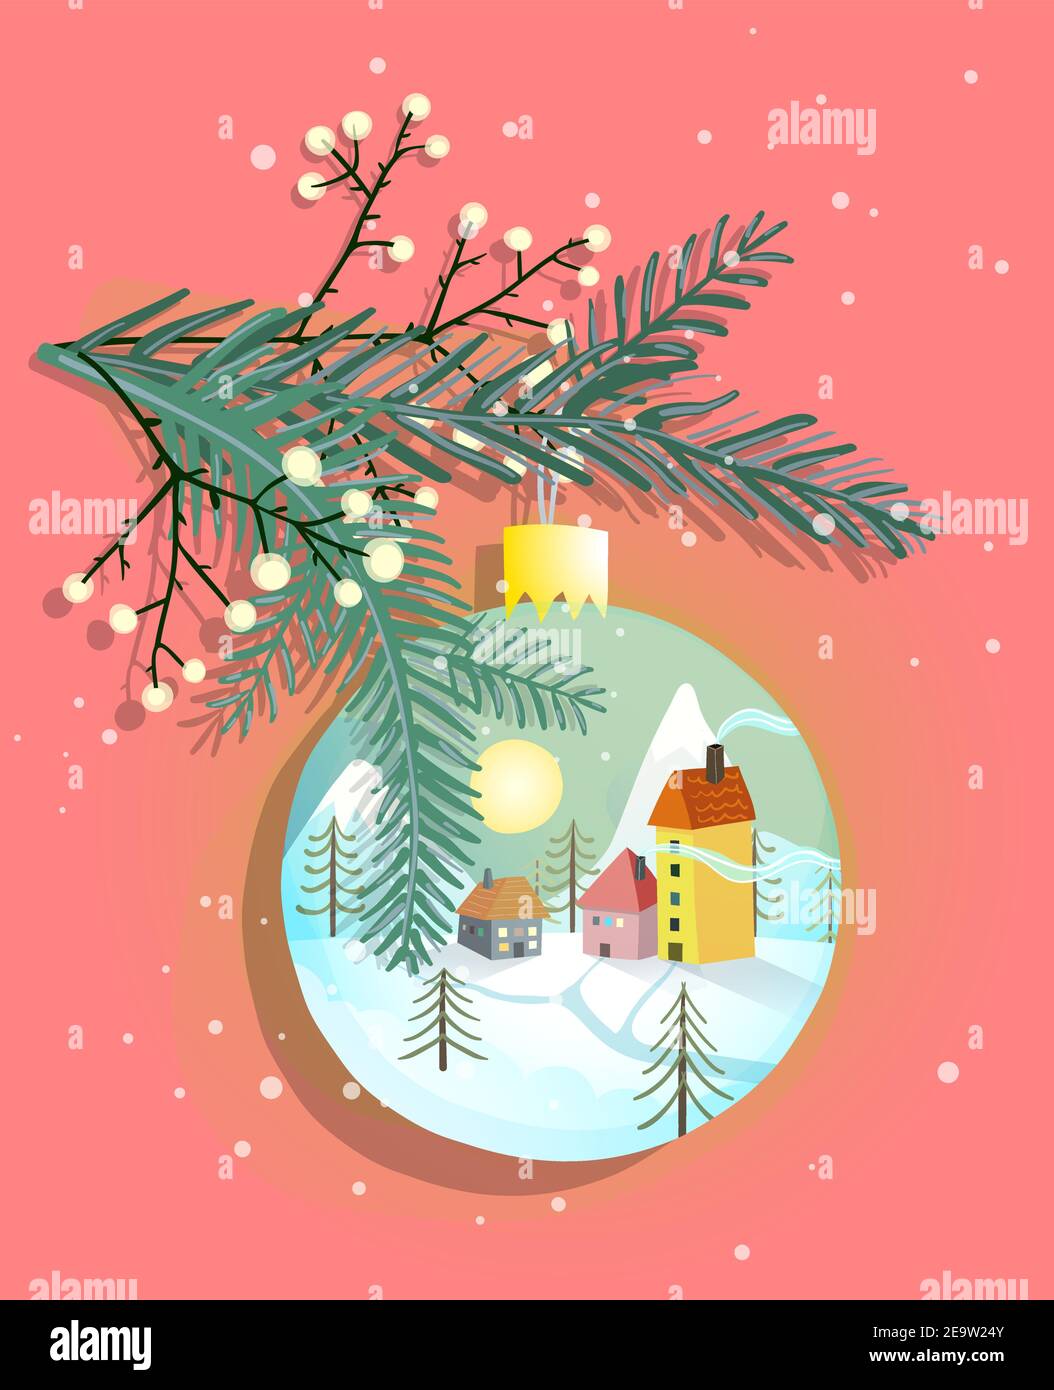 Merry Christmas ball with countryside romantic rural scenery. Stock Vector